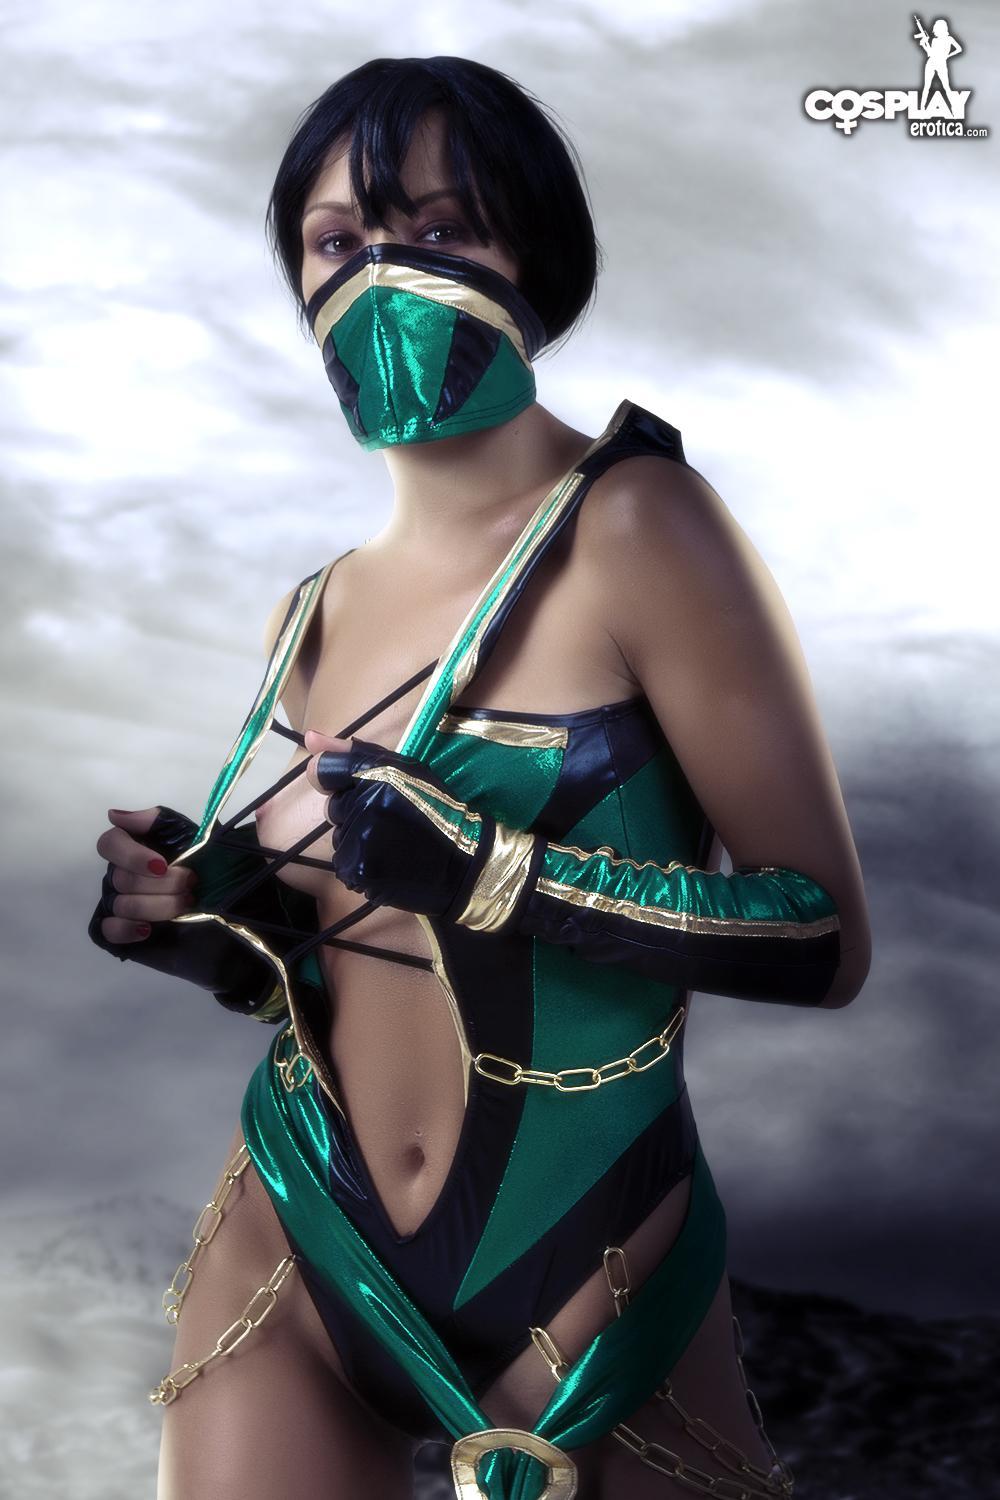 Cosplay babe Brownie dresses as a super hot Jade from Mortal Kombat #53563639